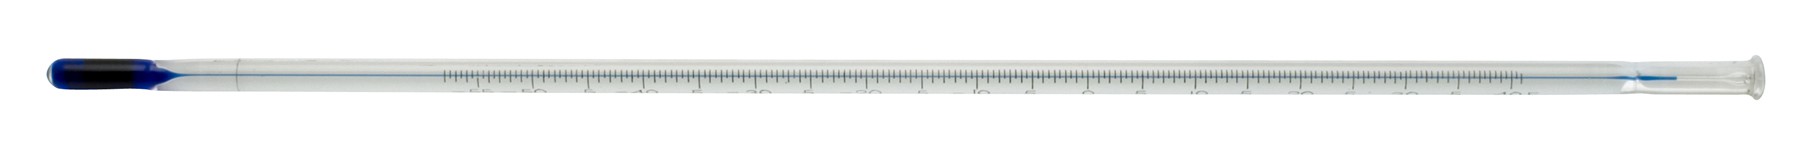 H-B DURAC Plus ASTM Like Liquid-In-Glass Thermometer; 9C / Low-Pensky-Martens, 57mm Immersion, -5 to 110C, Organic Liquid Fill